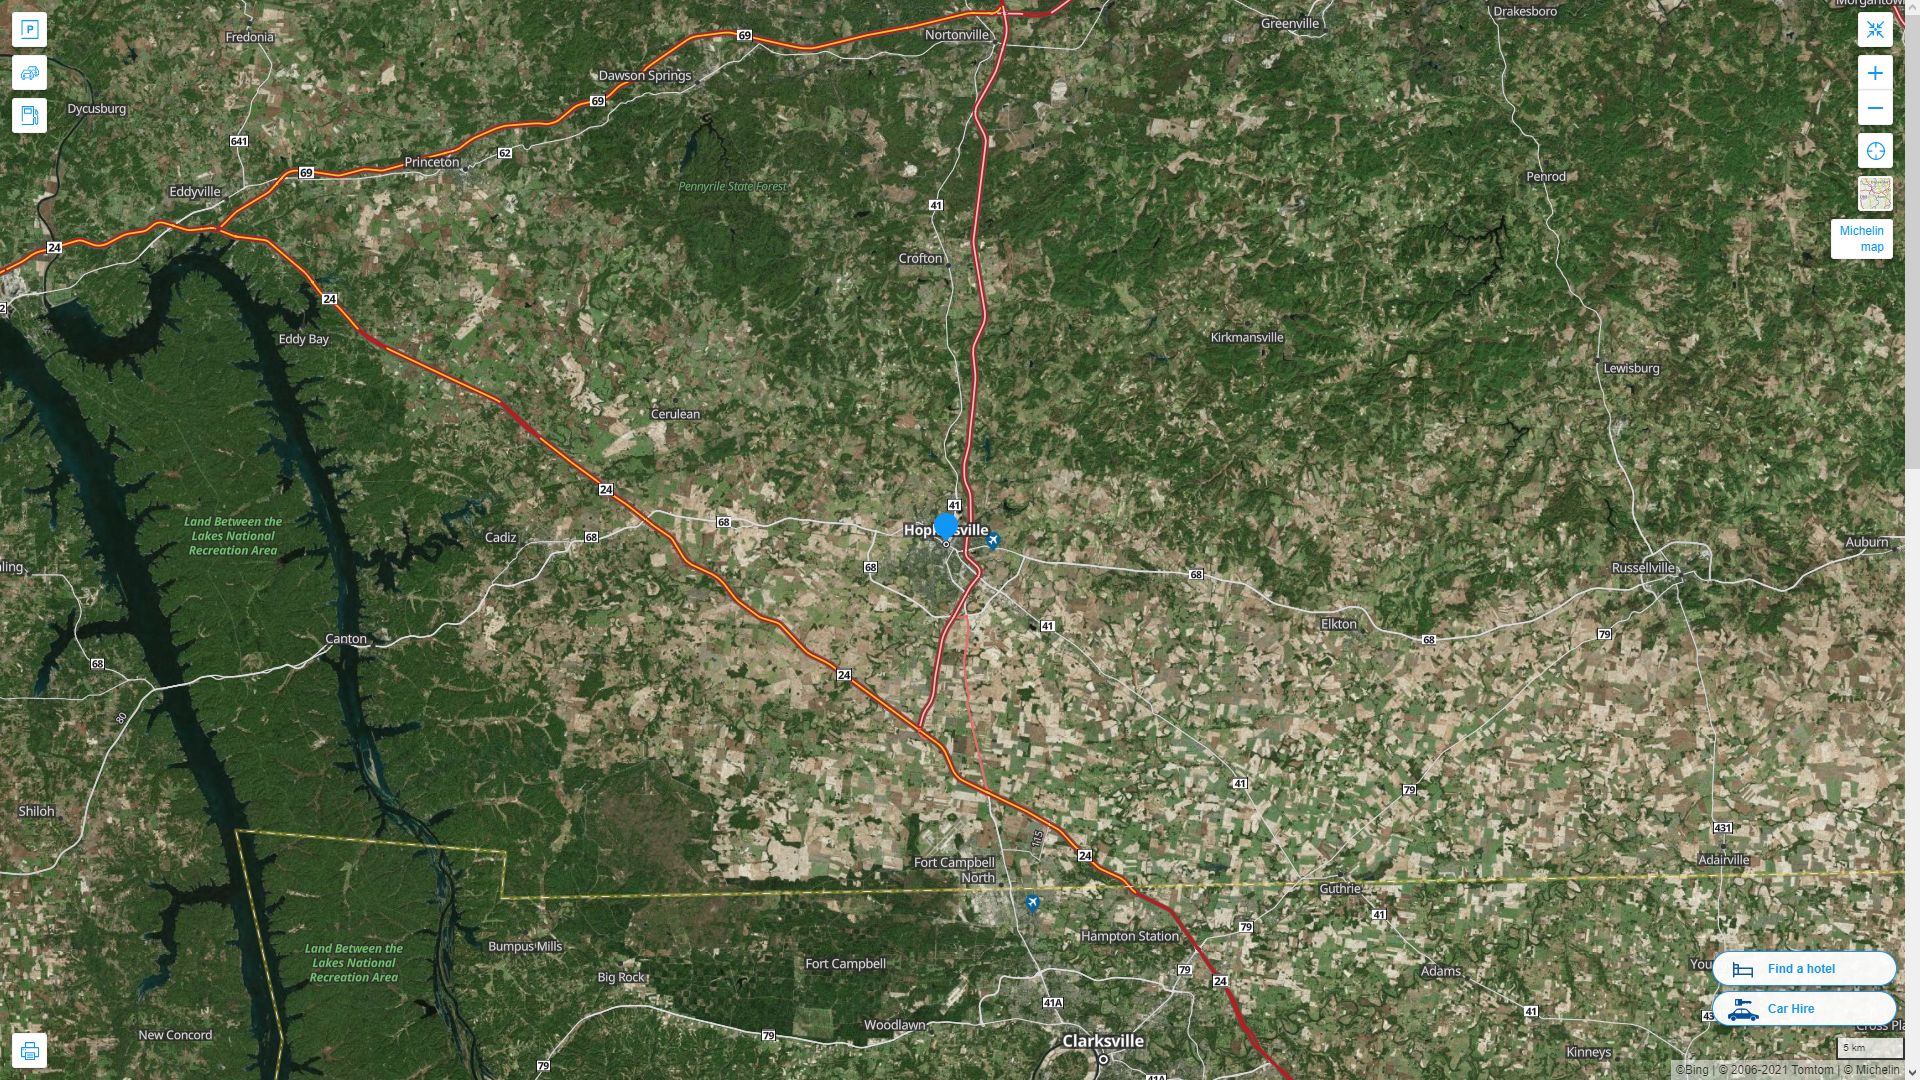 Hopkinsville Kentucky Highway and Road Map with Satellite View